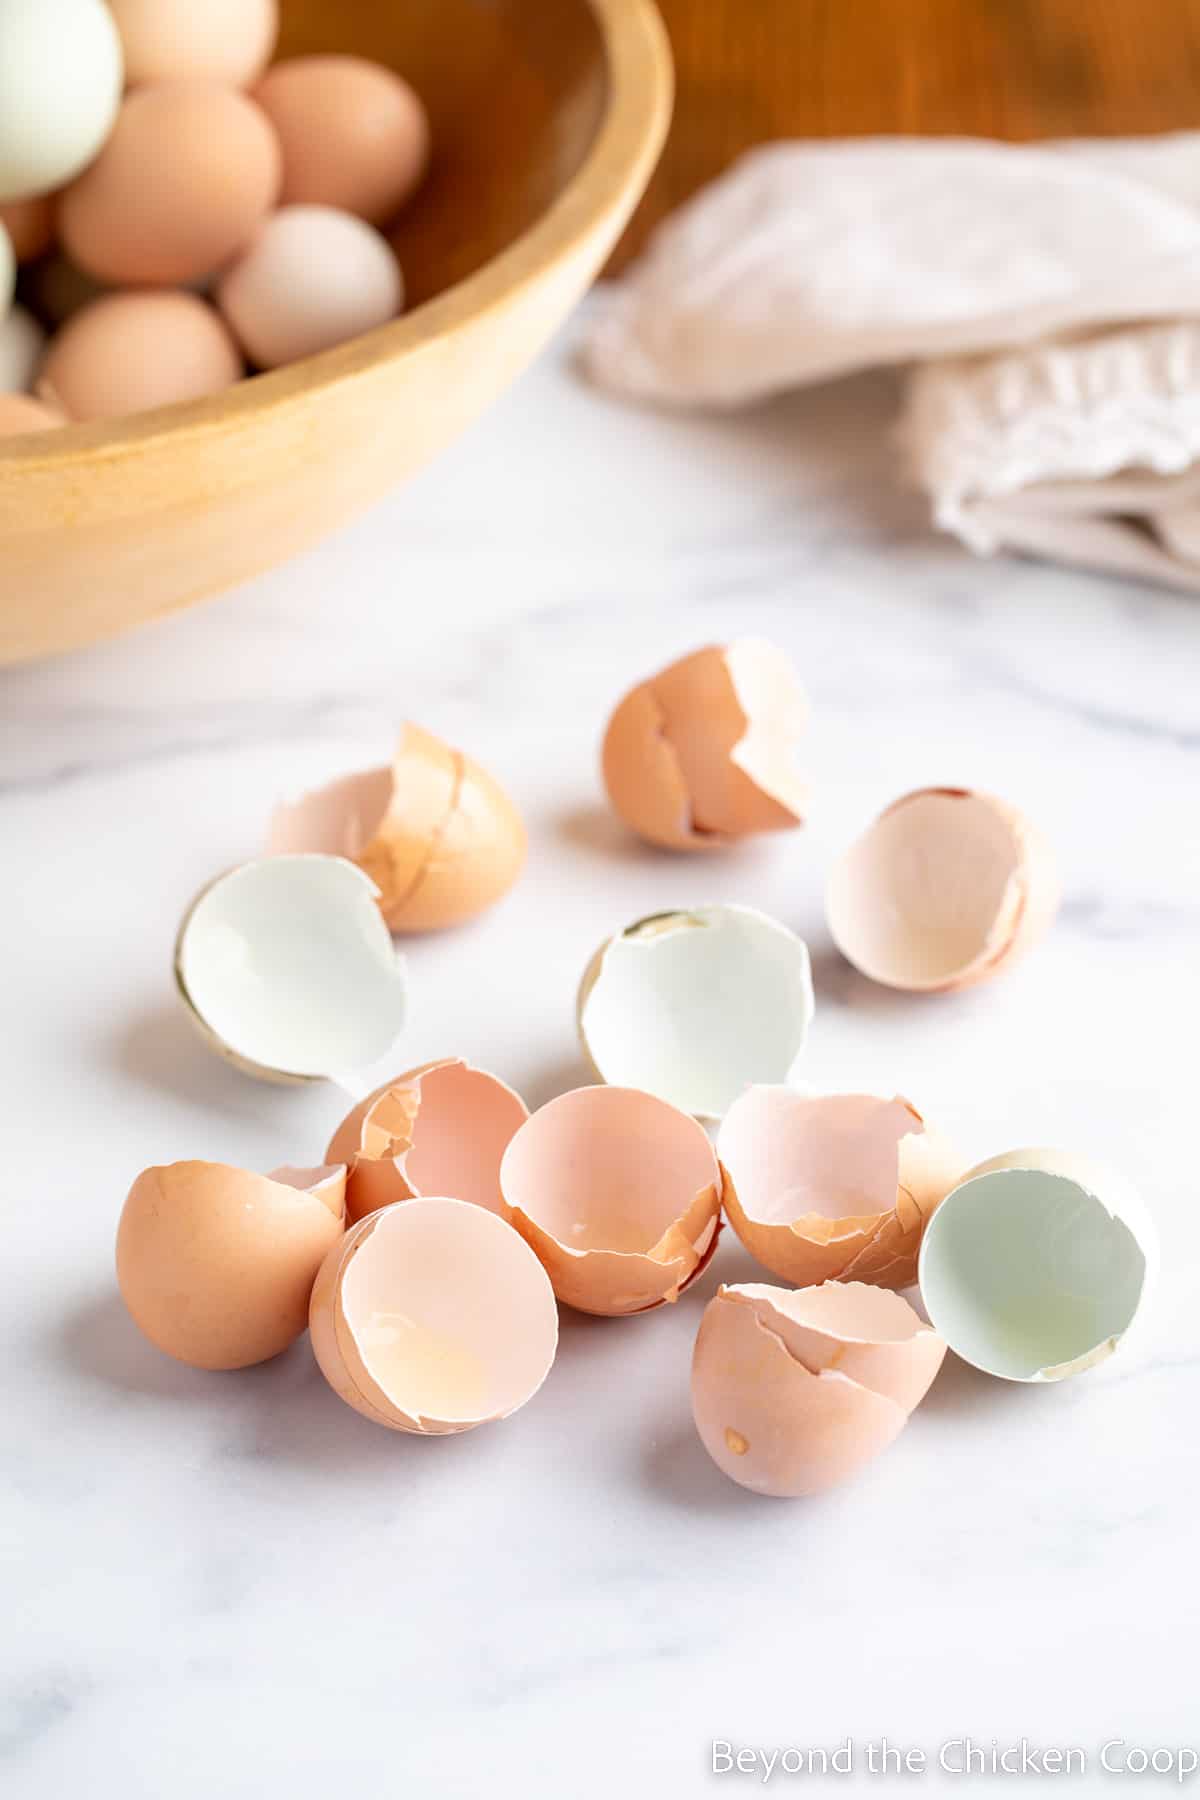 Egg shells on a marble surface. 